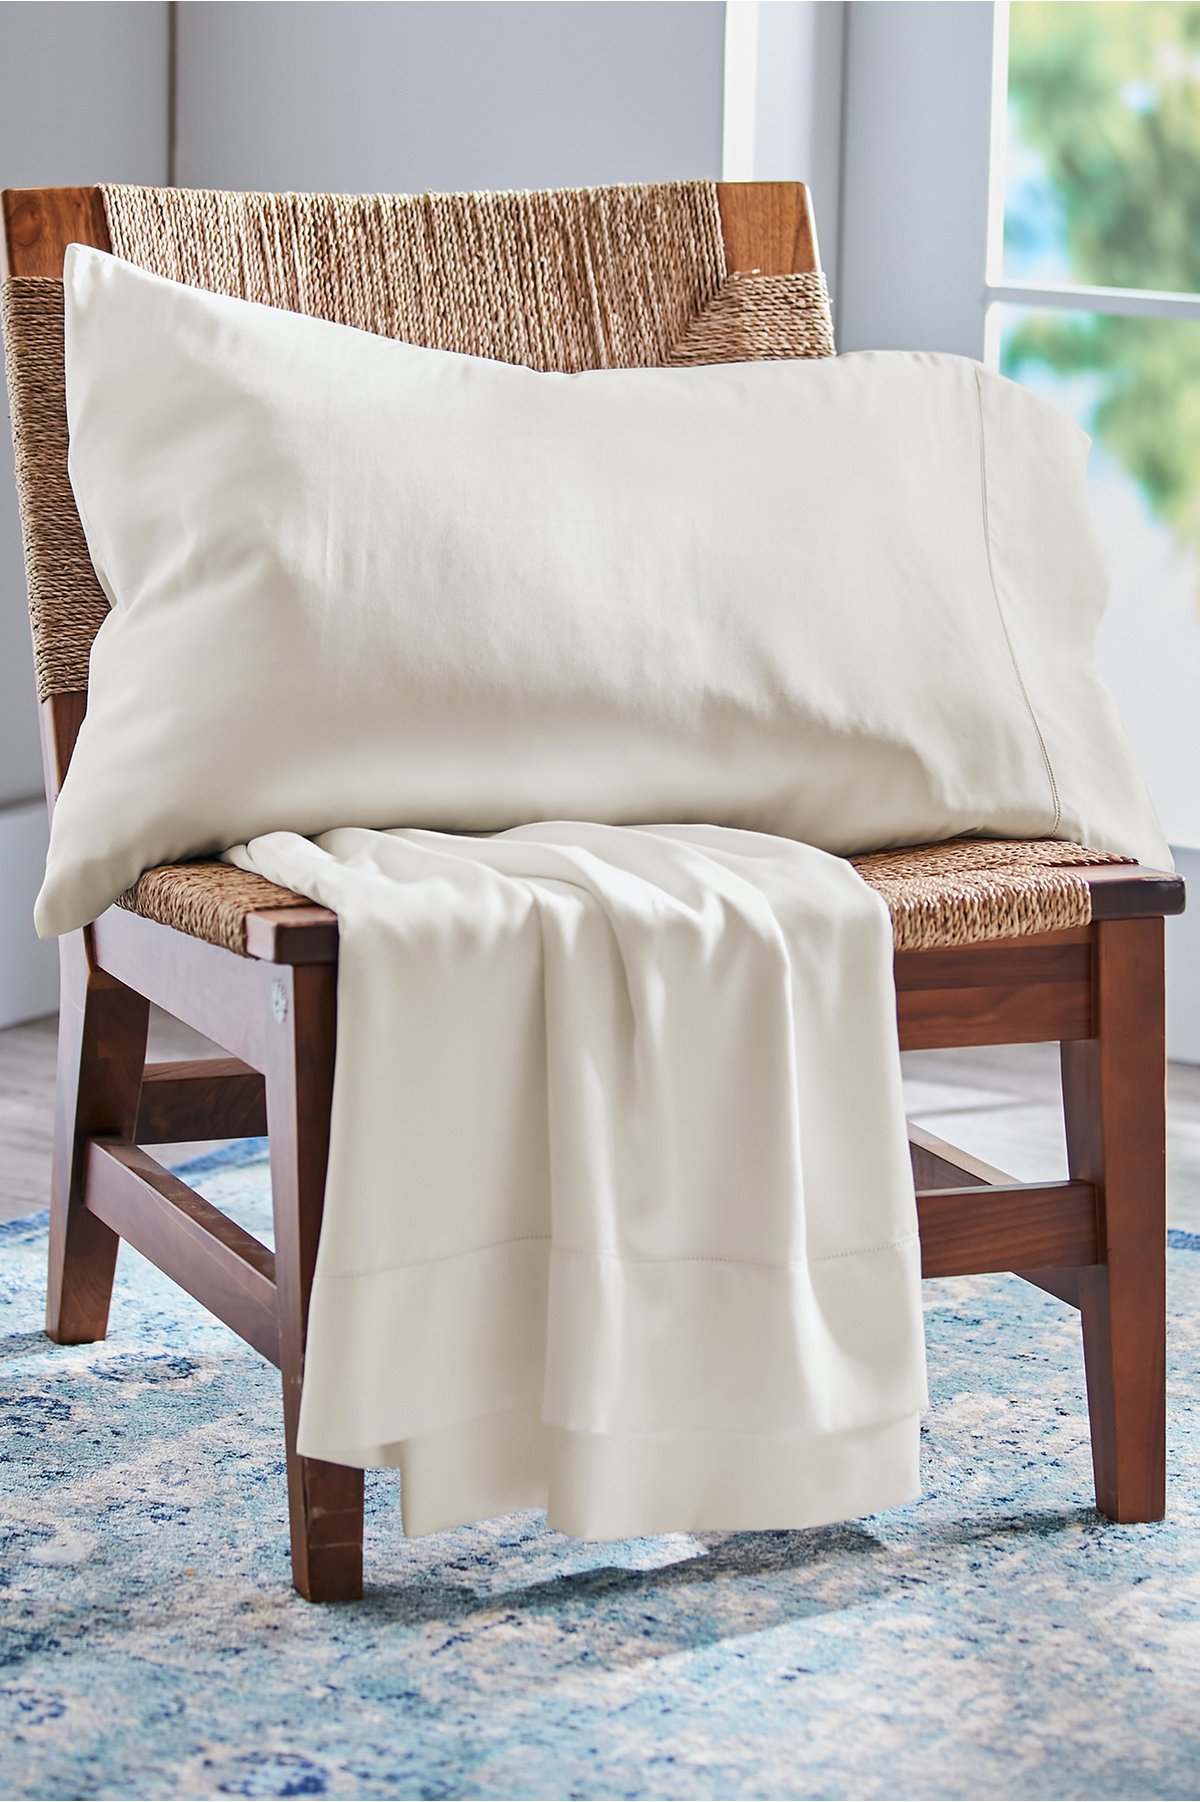 Blissful Bamboo Sheet Set by Soft Surroundings, in Ivory size Queen